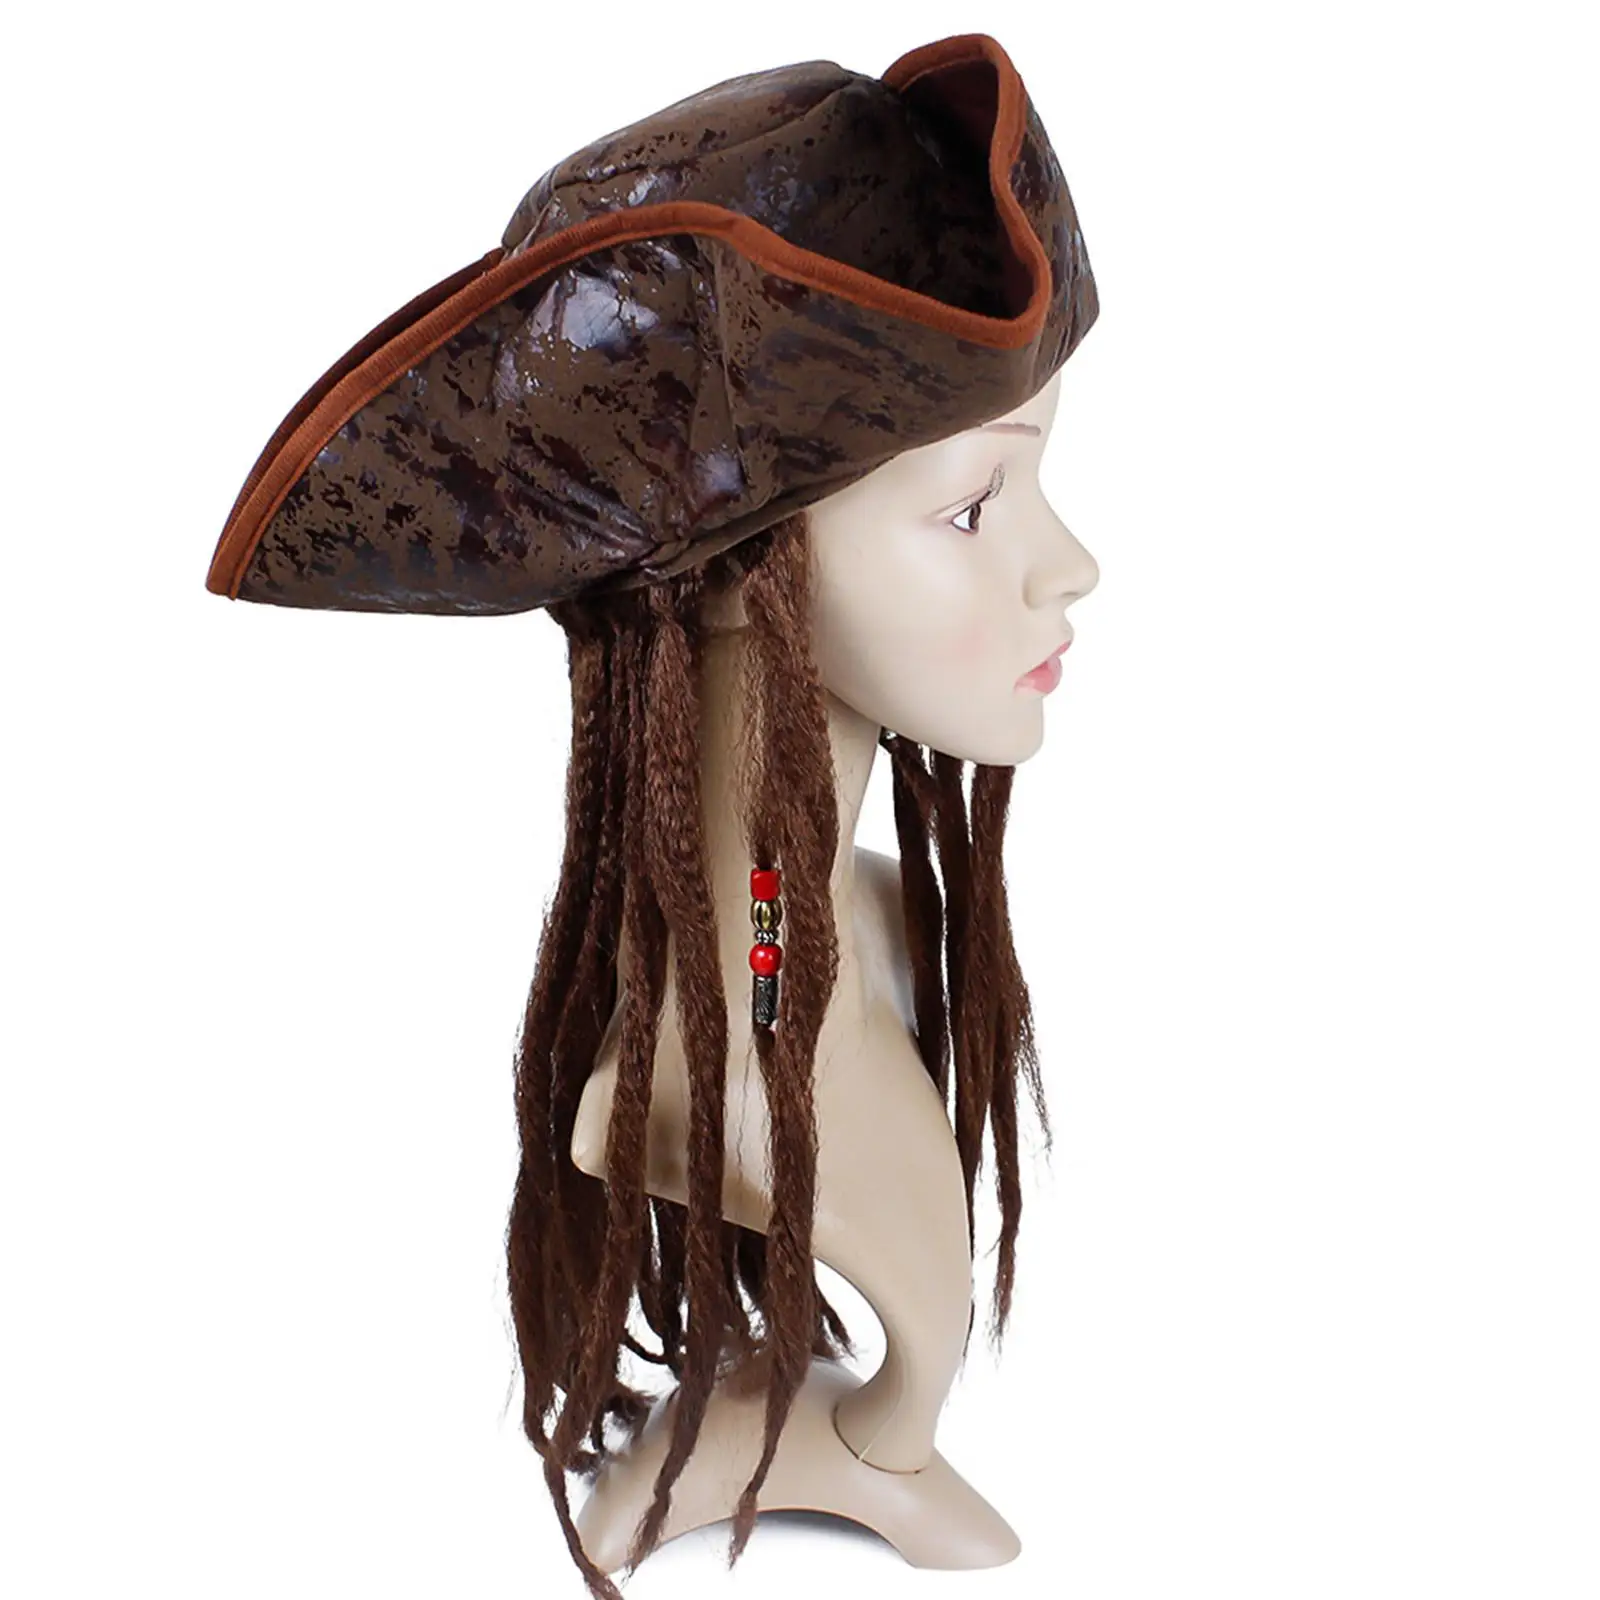 Faux Leather Pirate Hat with Wig captains Costume Cap for Fancy Dress Events Play Games of Adventure and Mischief Men